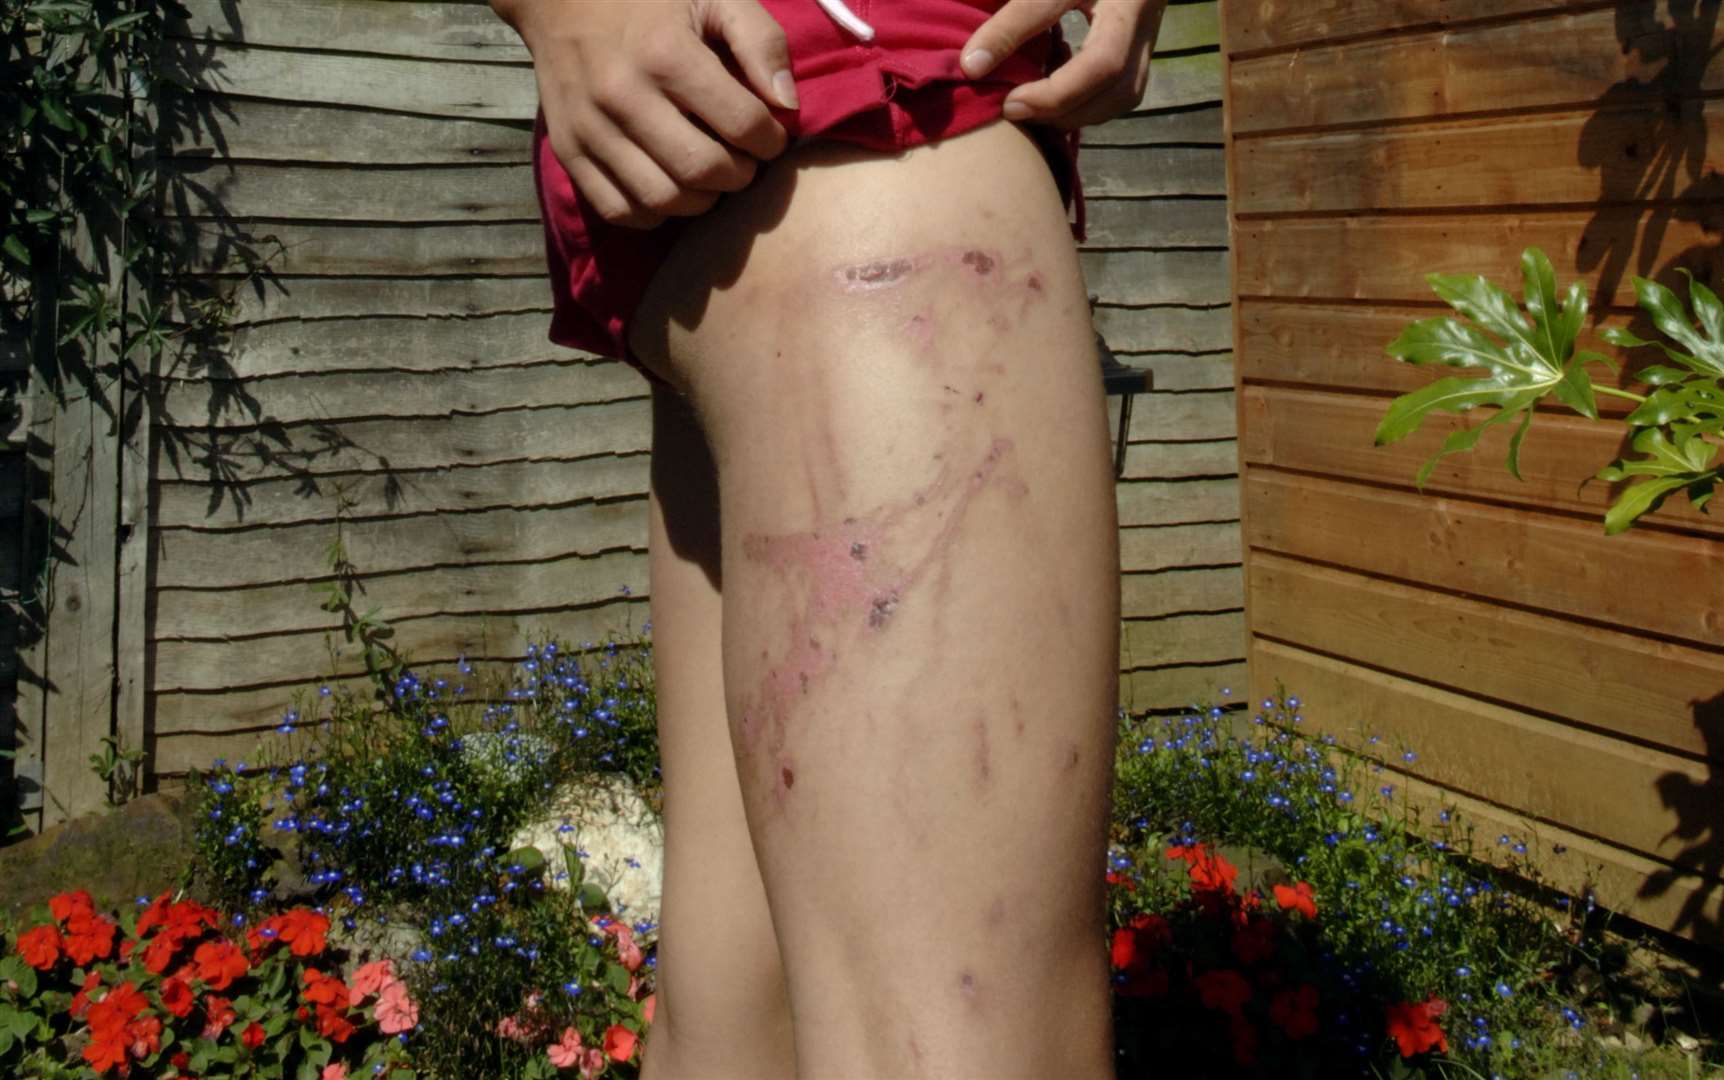 Scarring caused by contact with Giant Hogweed